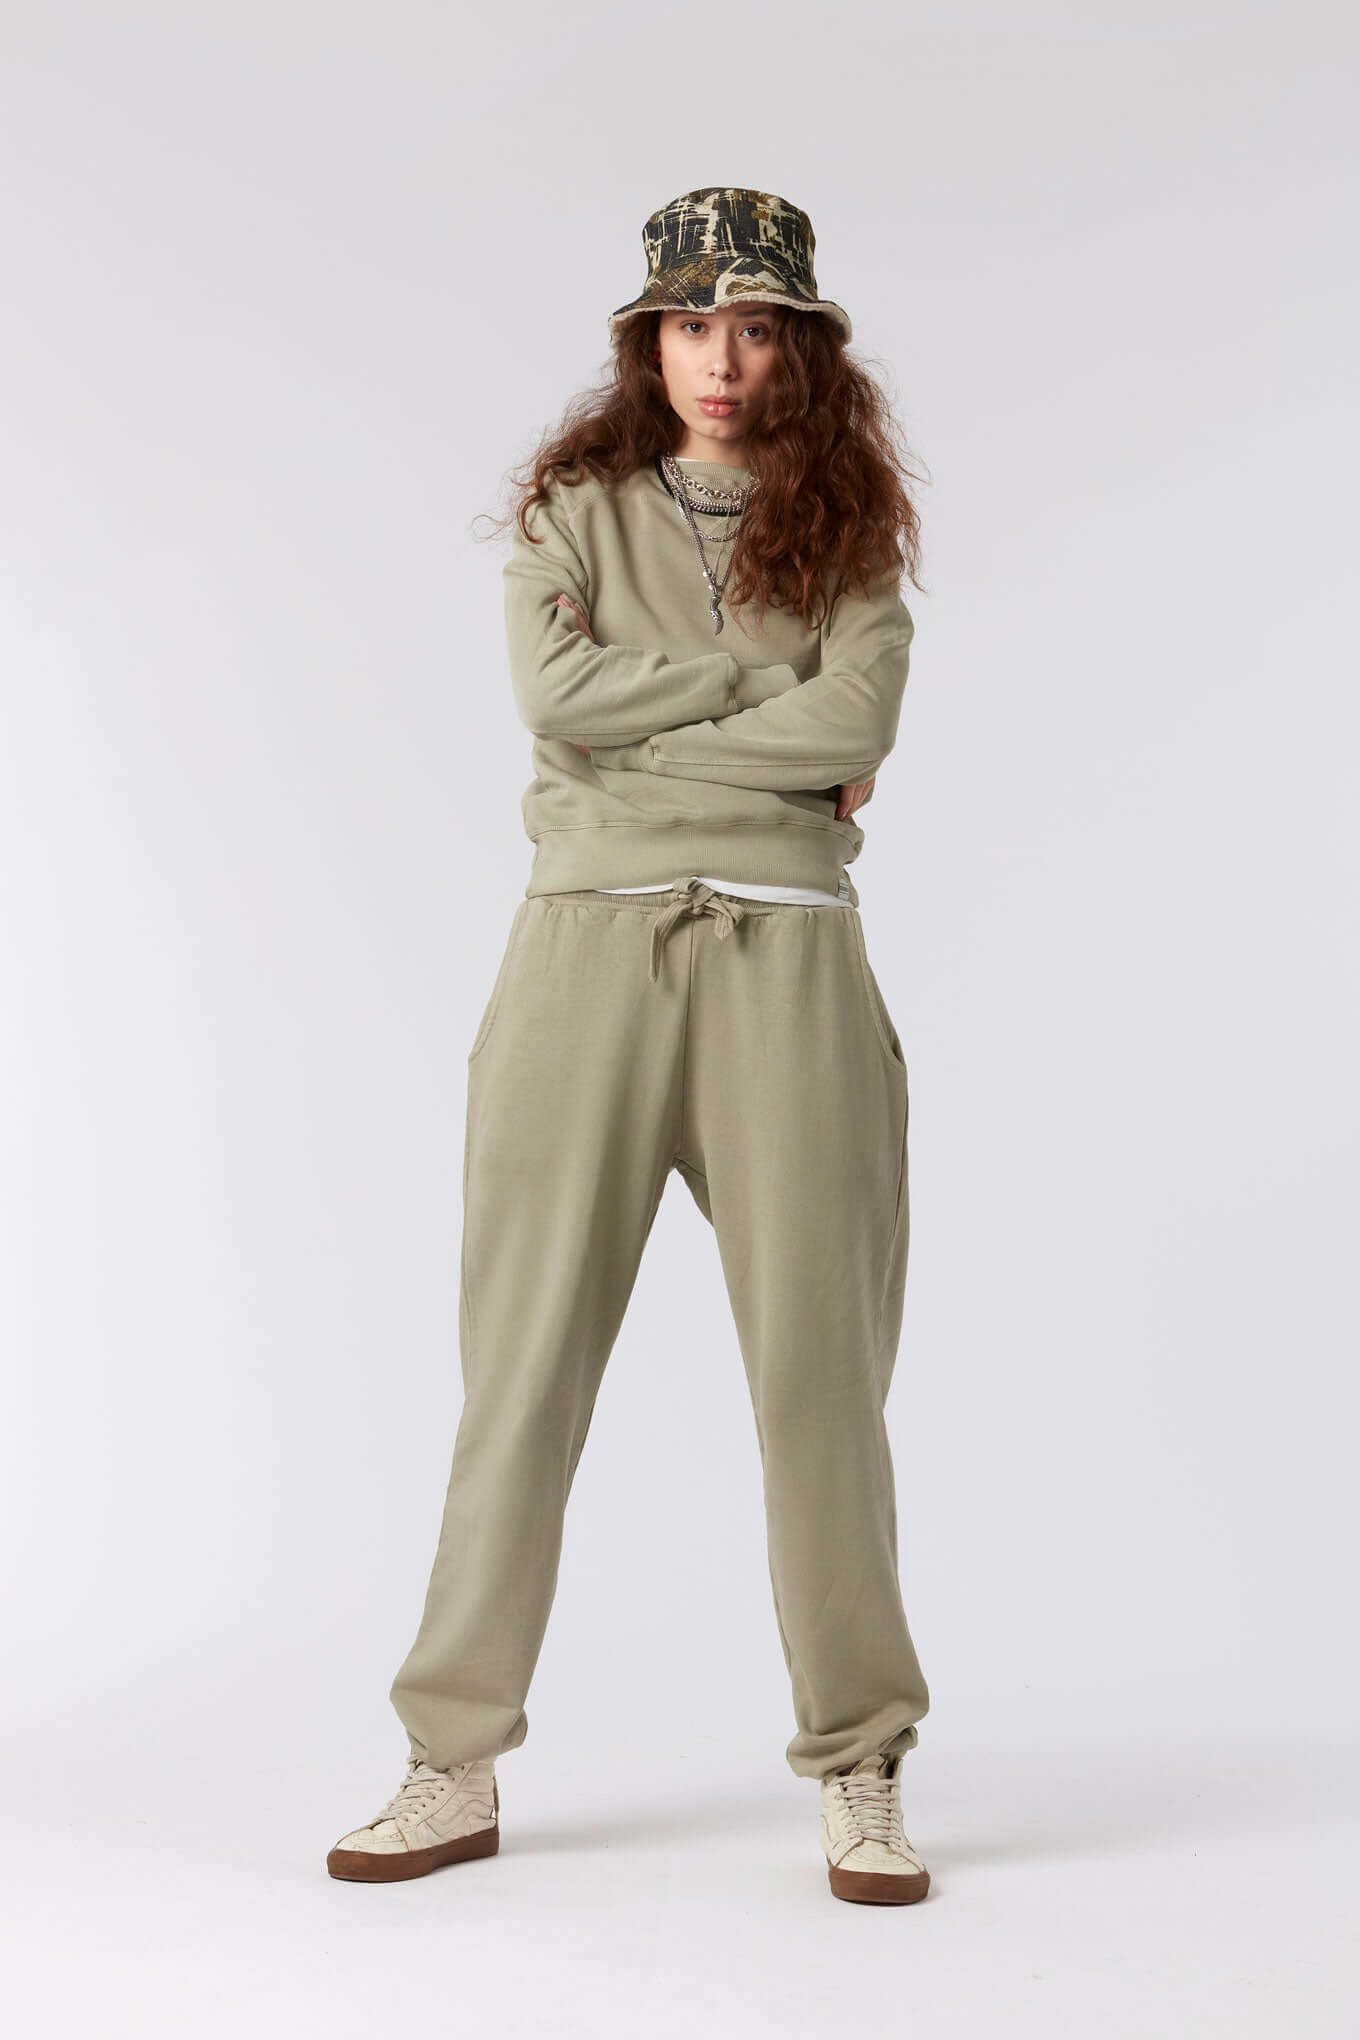 EVIE - GOTS Organic Cotton Trackpants Clay, Size 4 / UK 14 / EUR 42